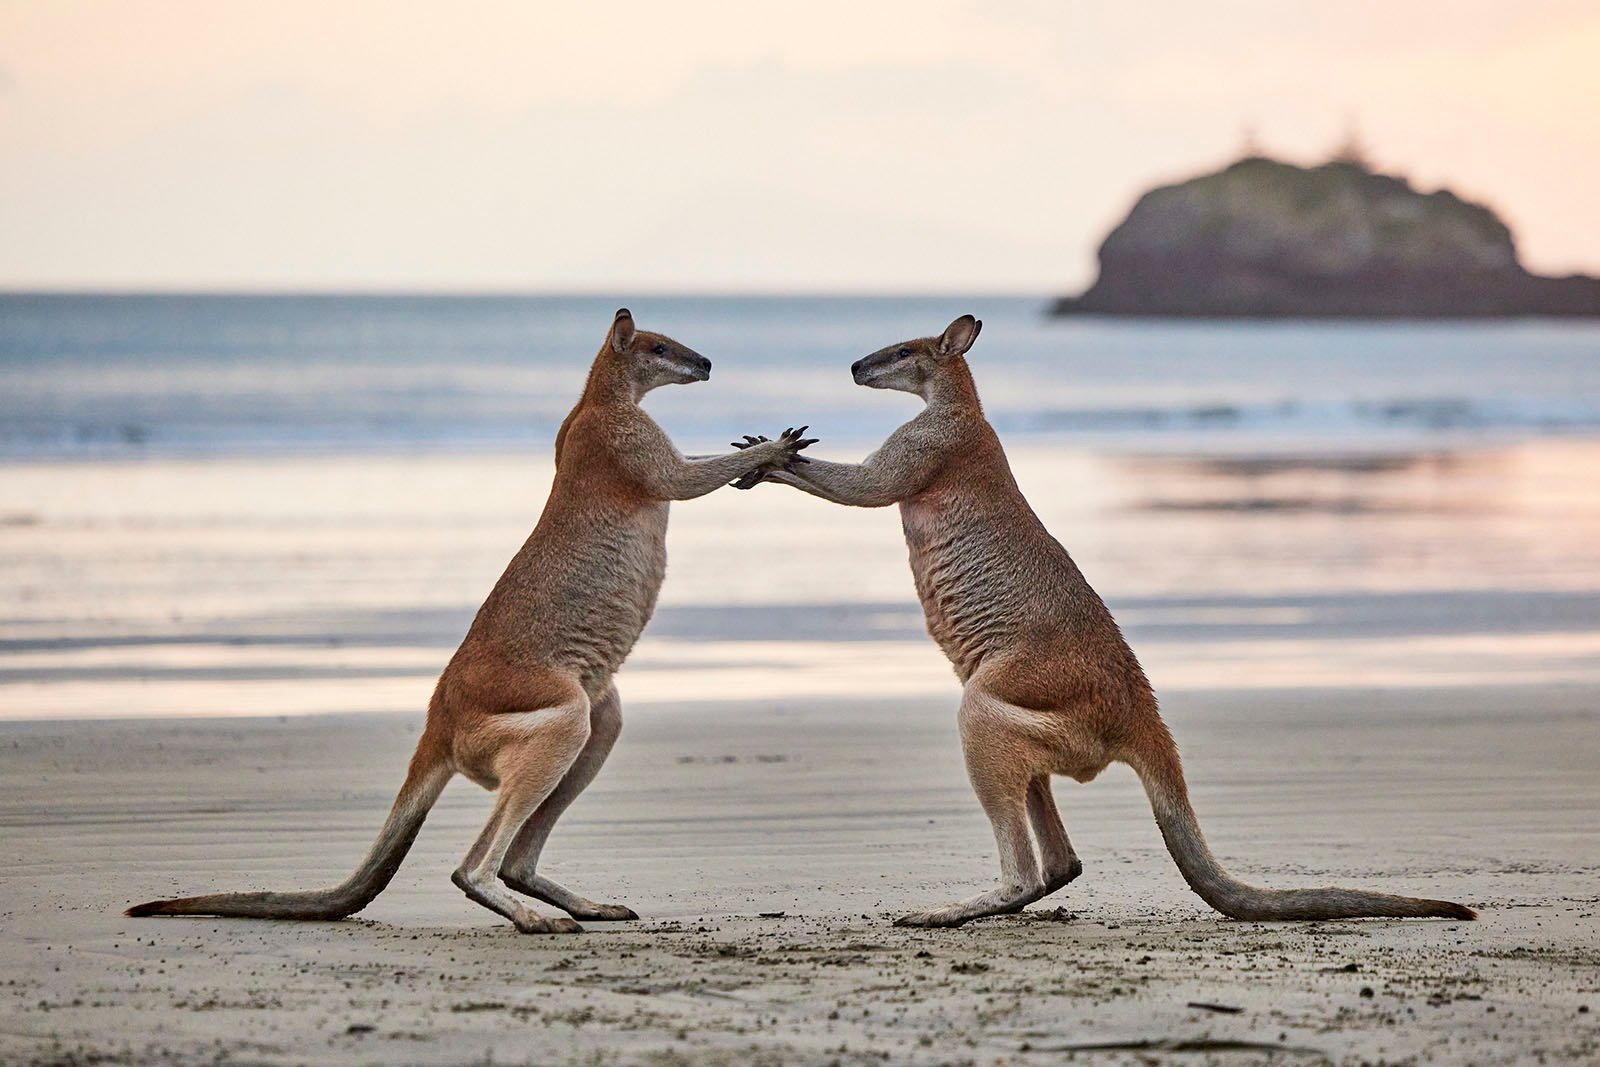 Two wallabies look as if they're dancing.